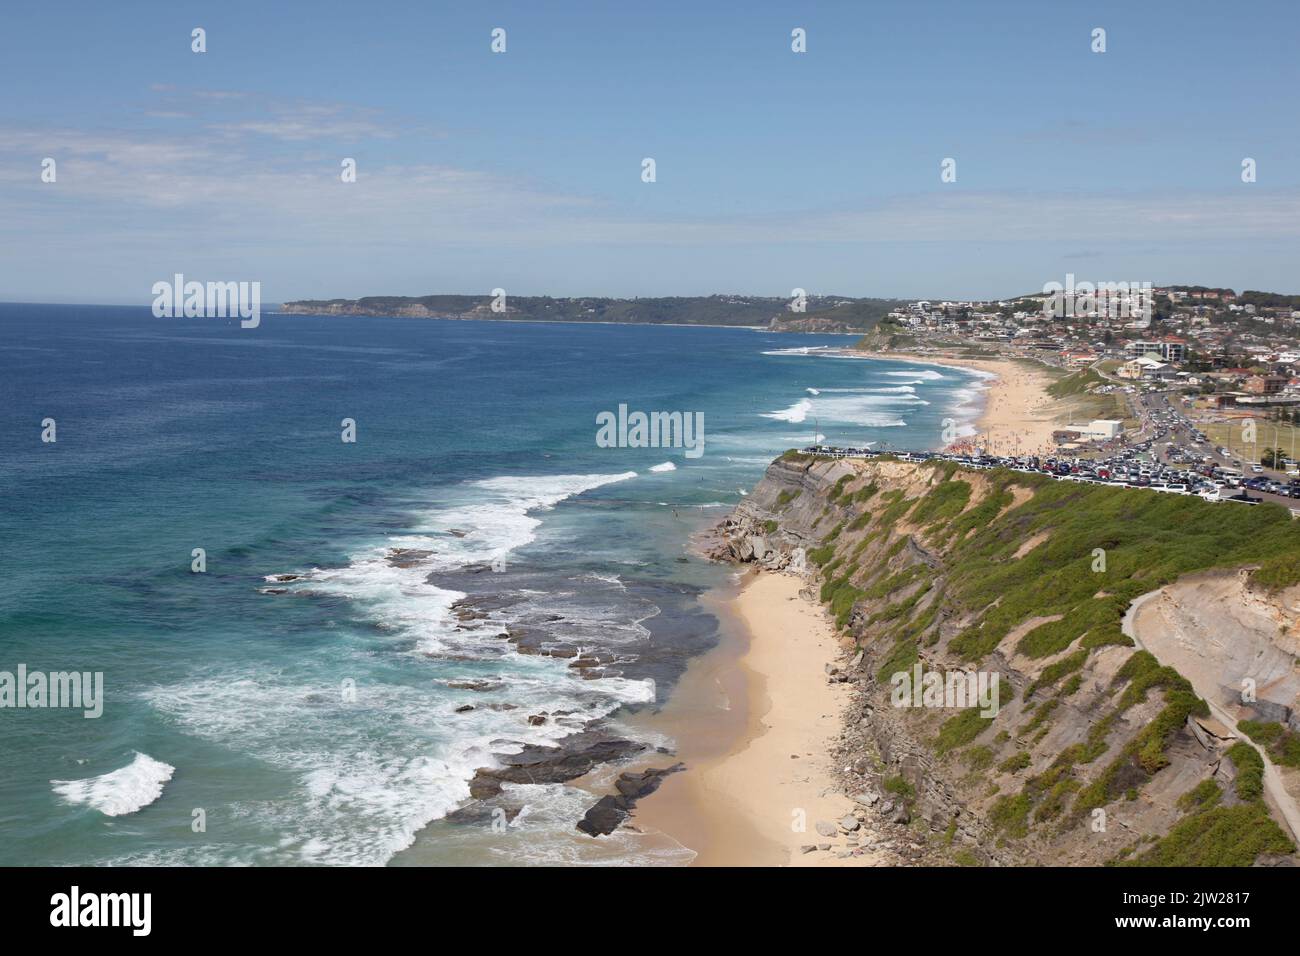 Bar Beach and Merewether on a summer day - Newcastle Australia. Newcastle is Australia's second oldest city and is home to many fine beaches. Stock Photo